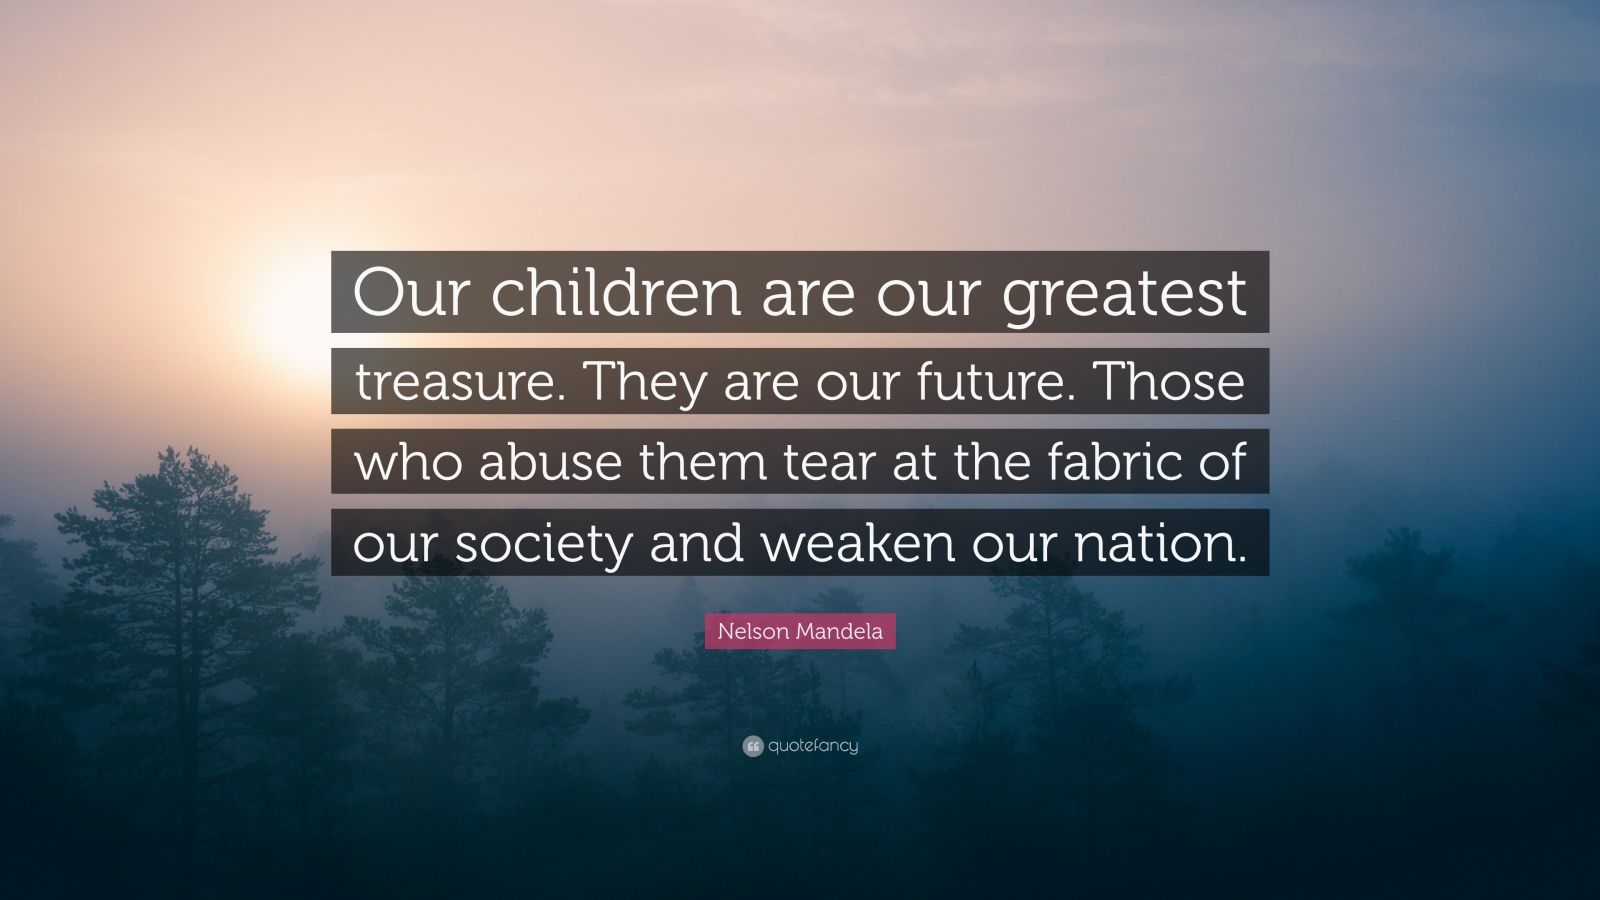 Nelson Mandela Quote: “Our children are our greatest treasure. They are